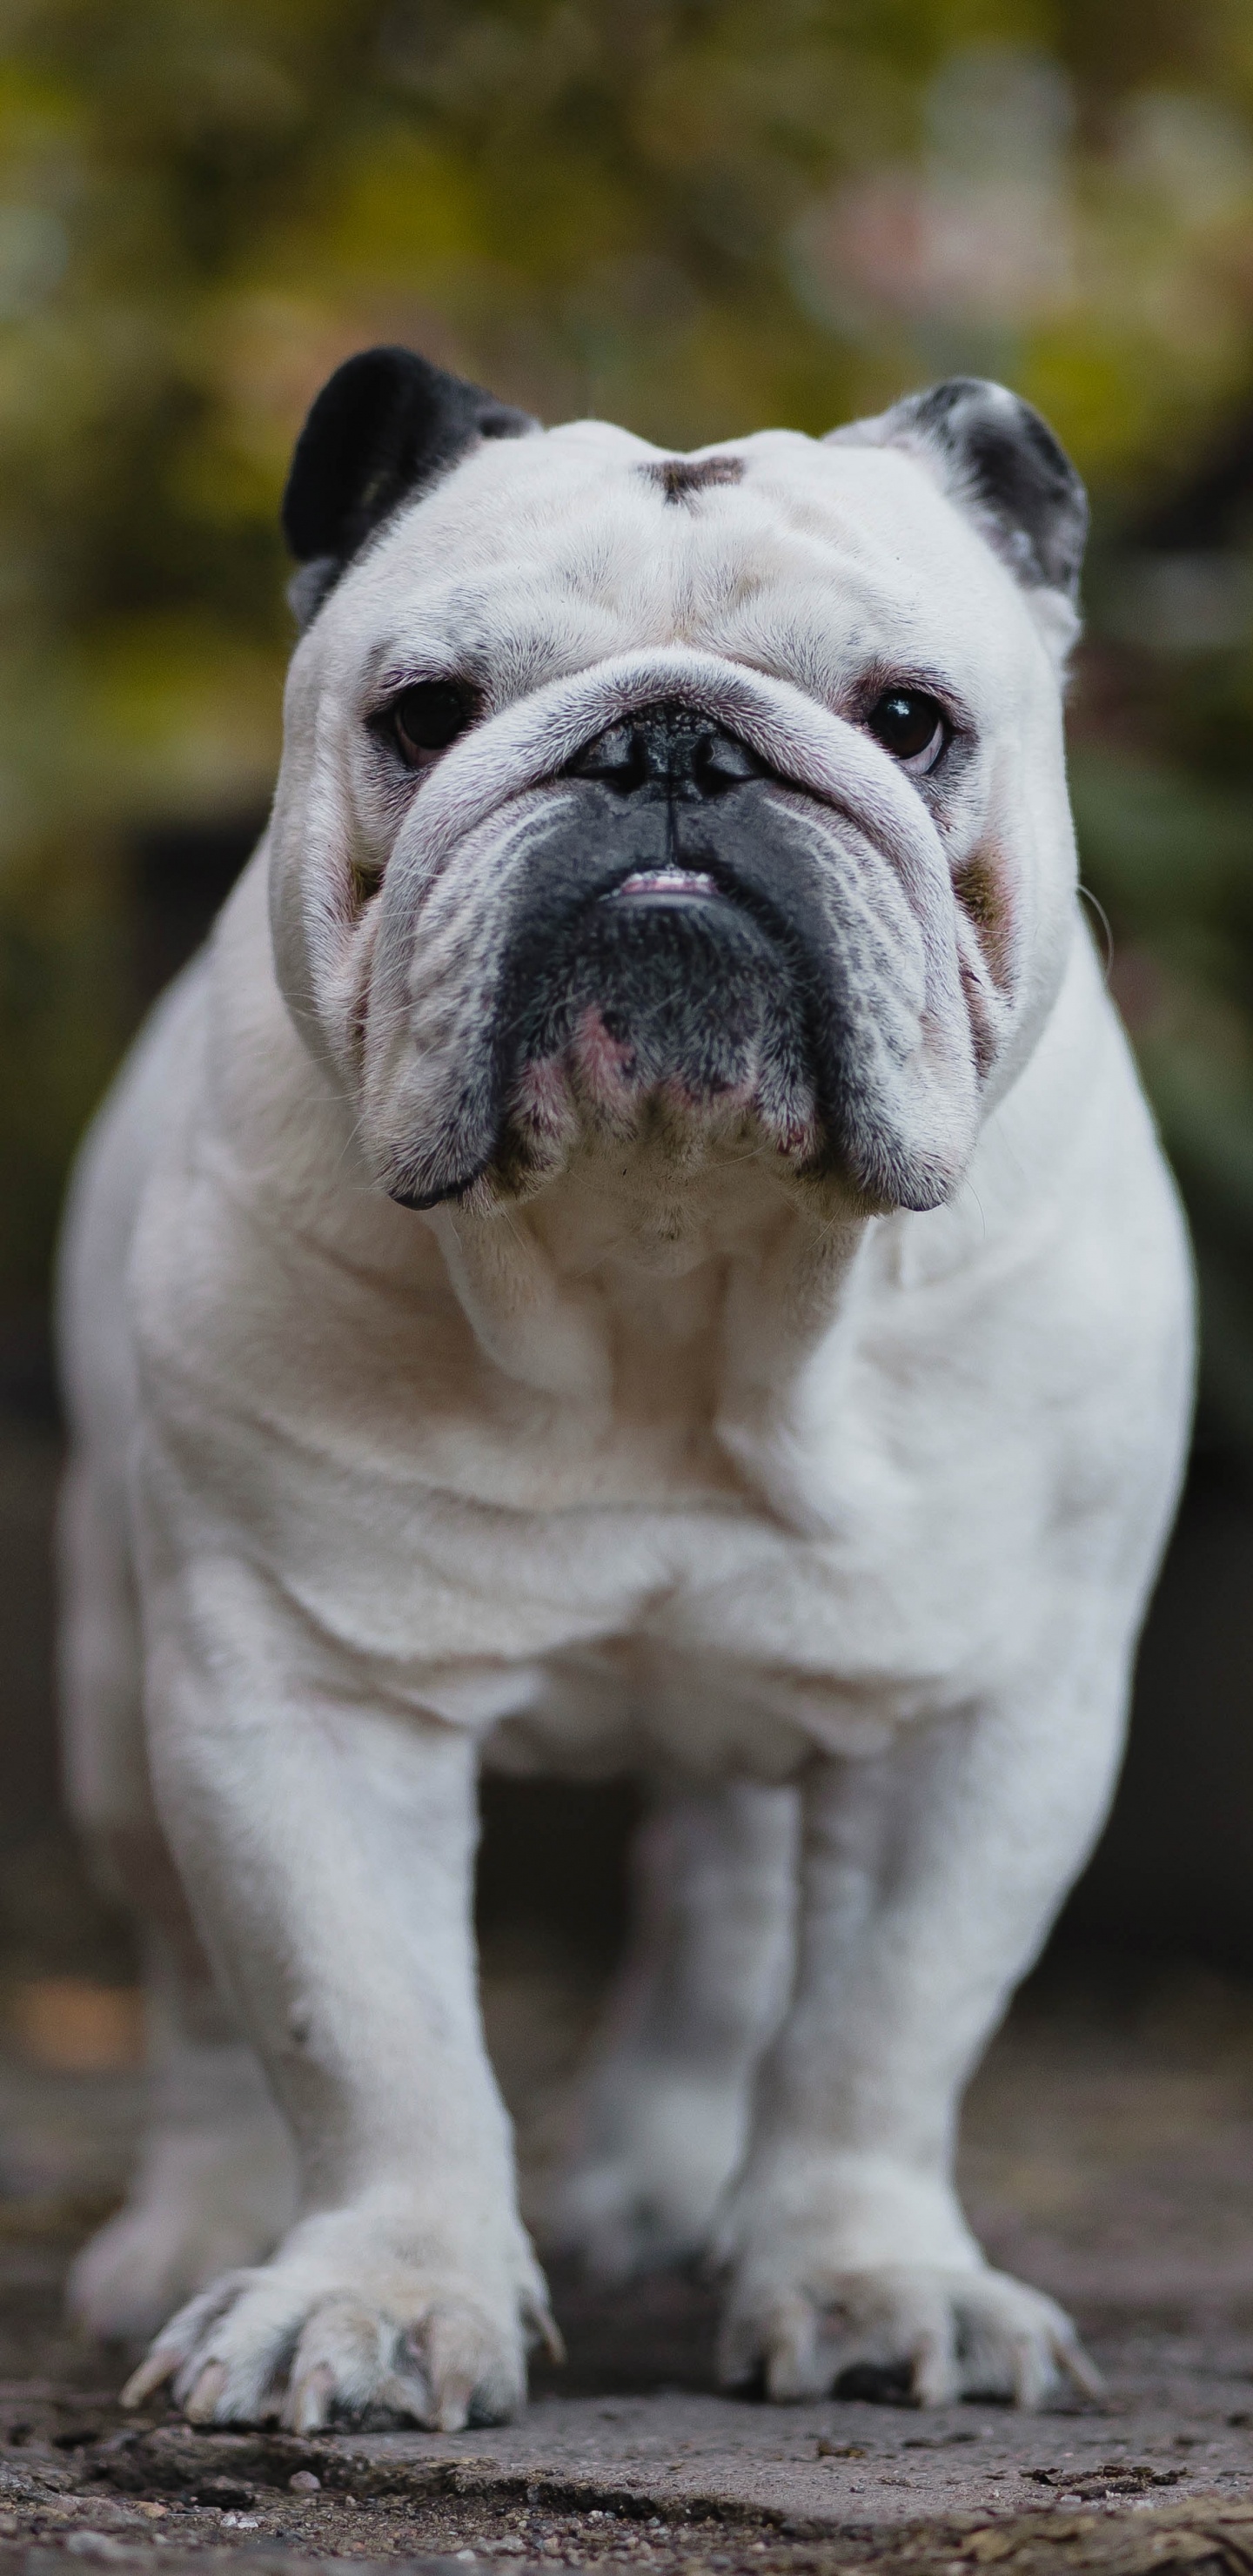 White and Brown English Bulldog Puppy on Brown Dirt. Wallpaper in 1440x2960 Resolution